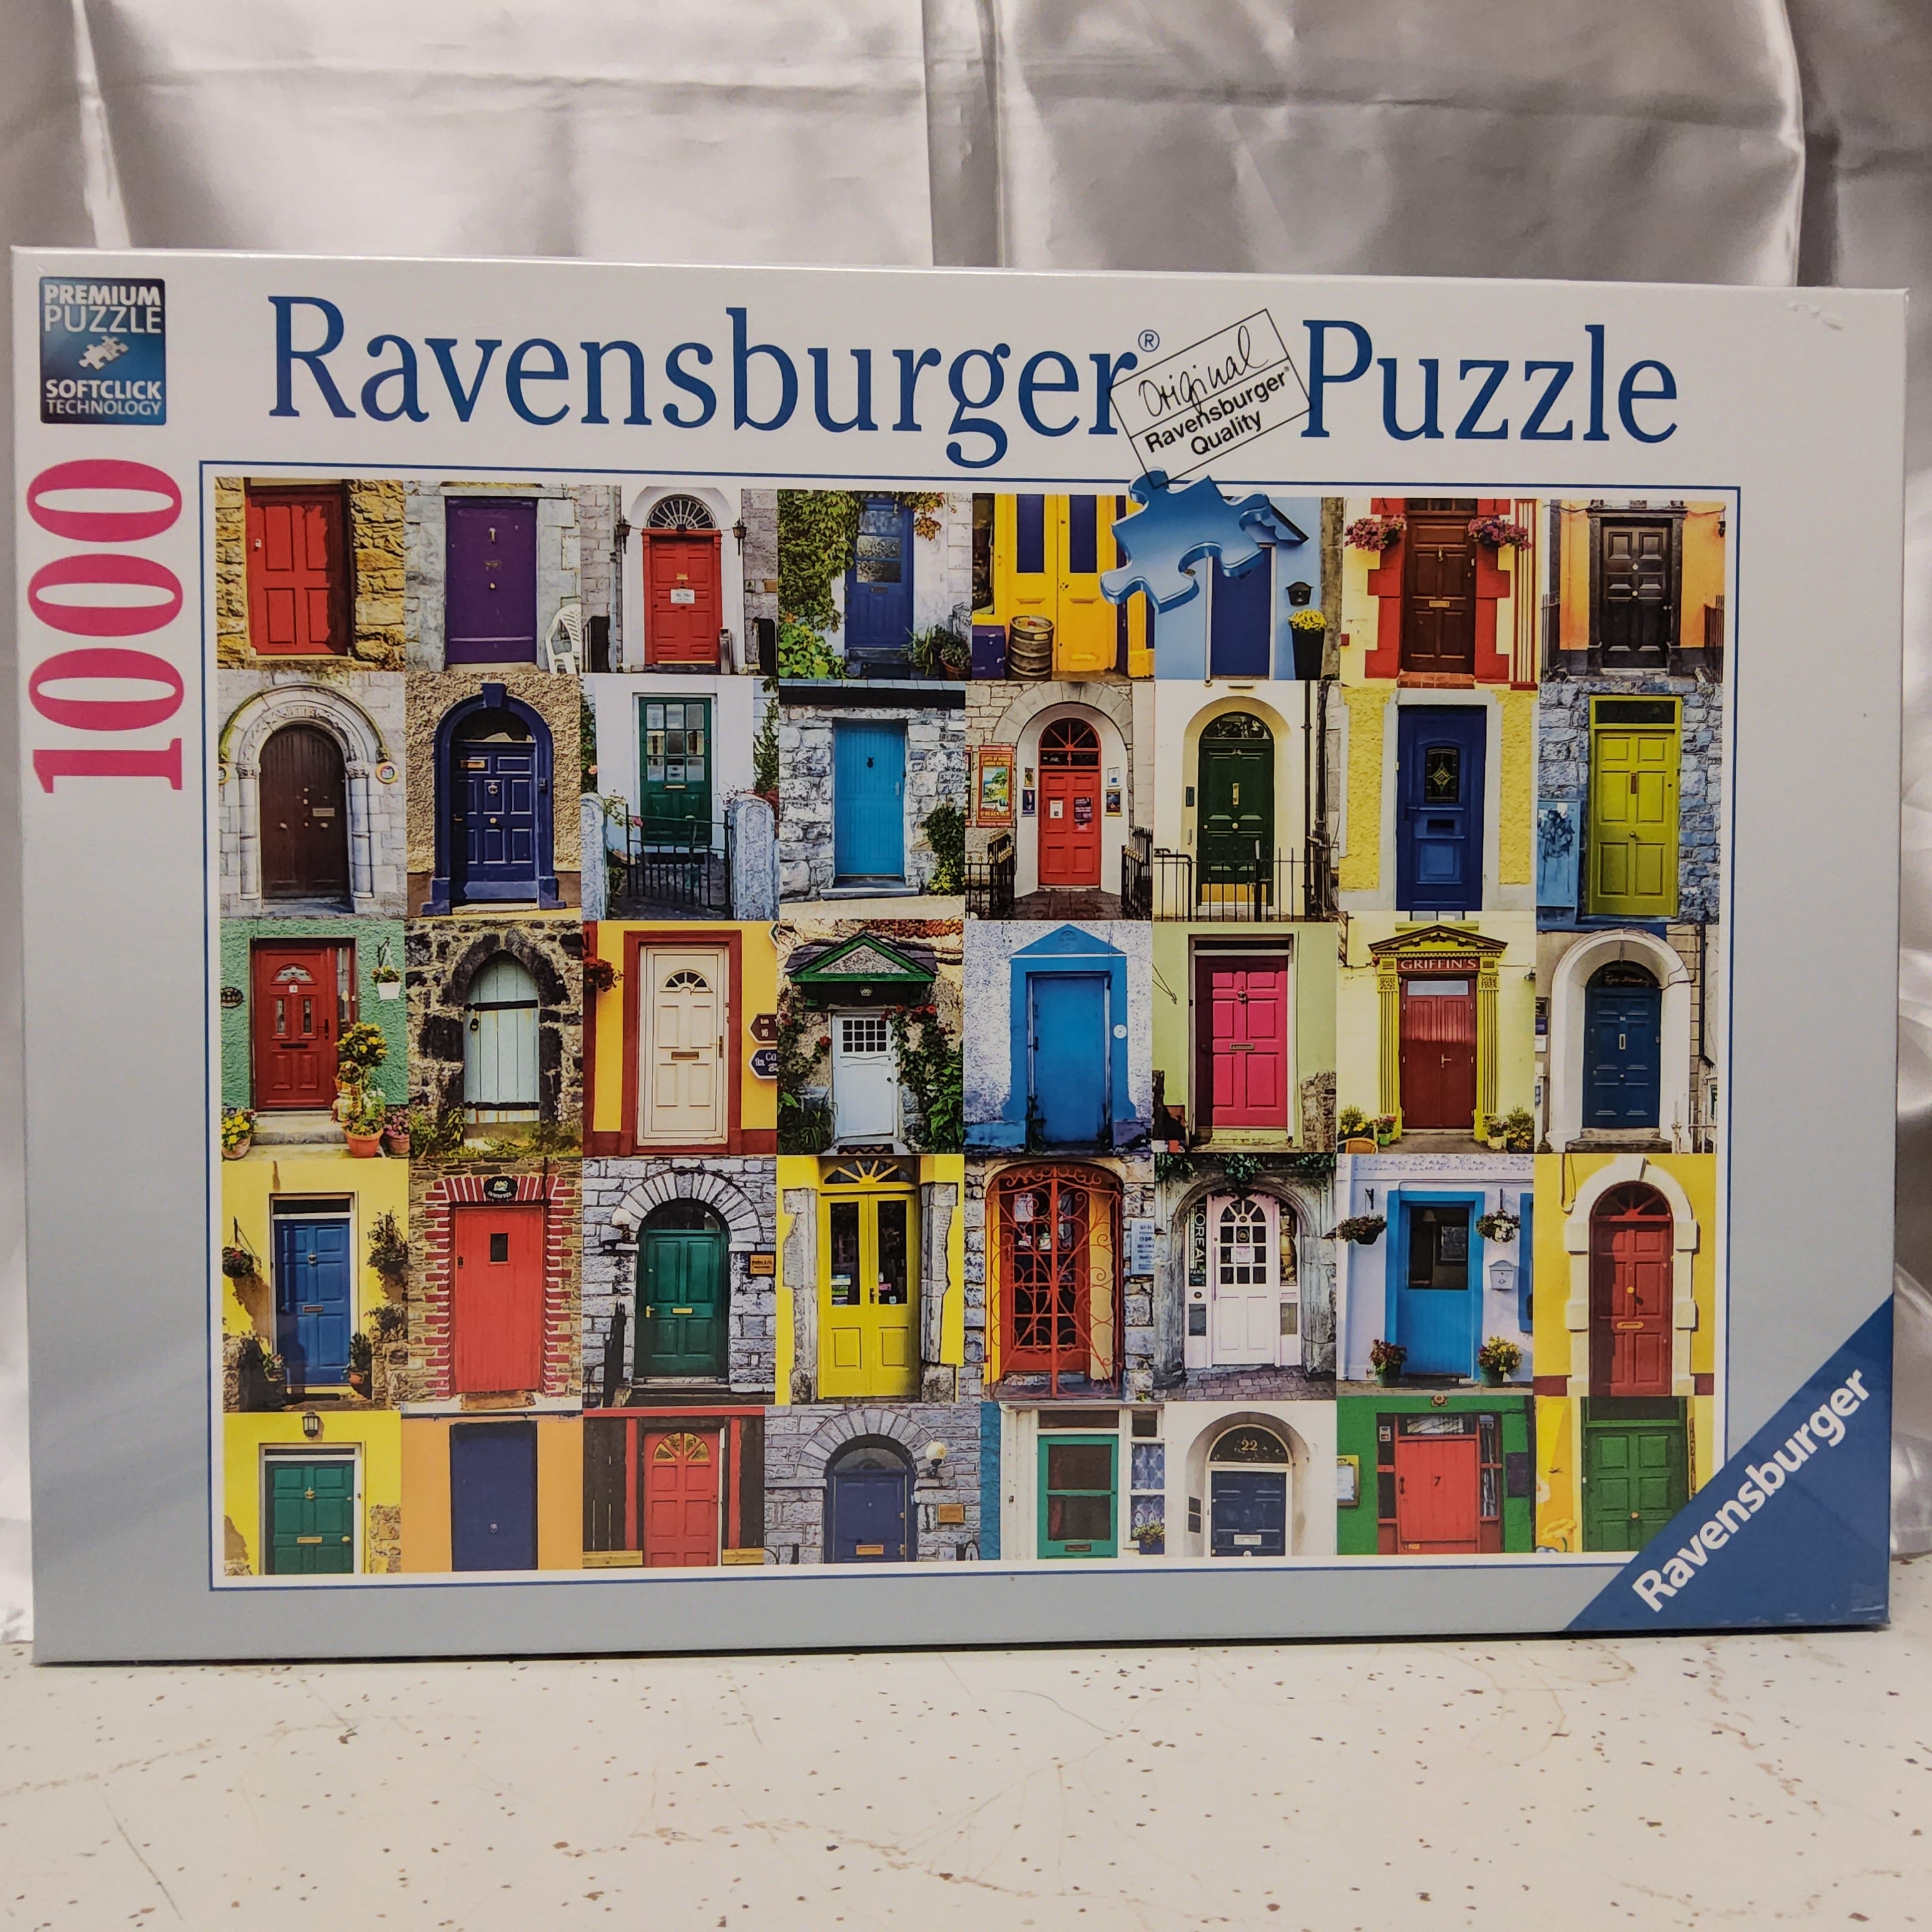 Ravensburger Puzzle - Doors of the World - 1000 pieces - #19524